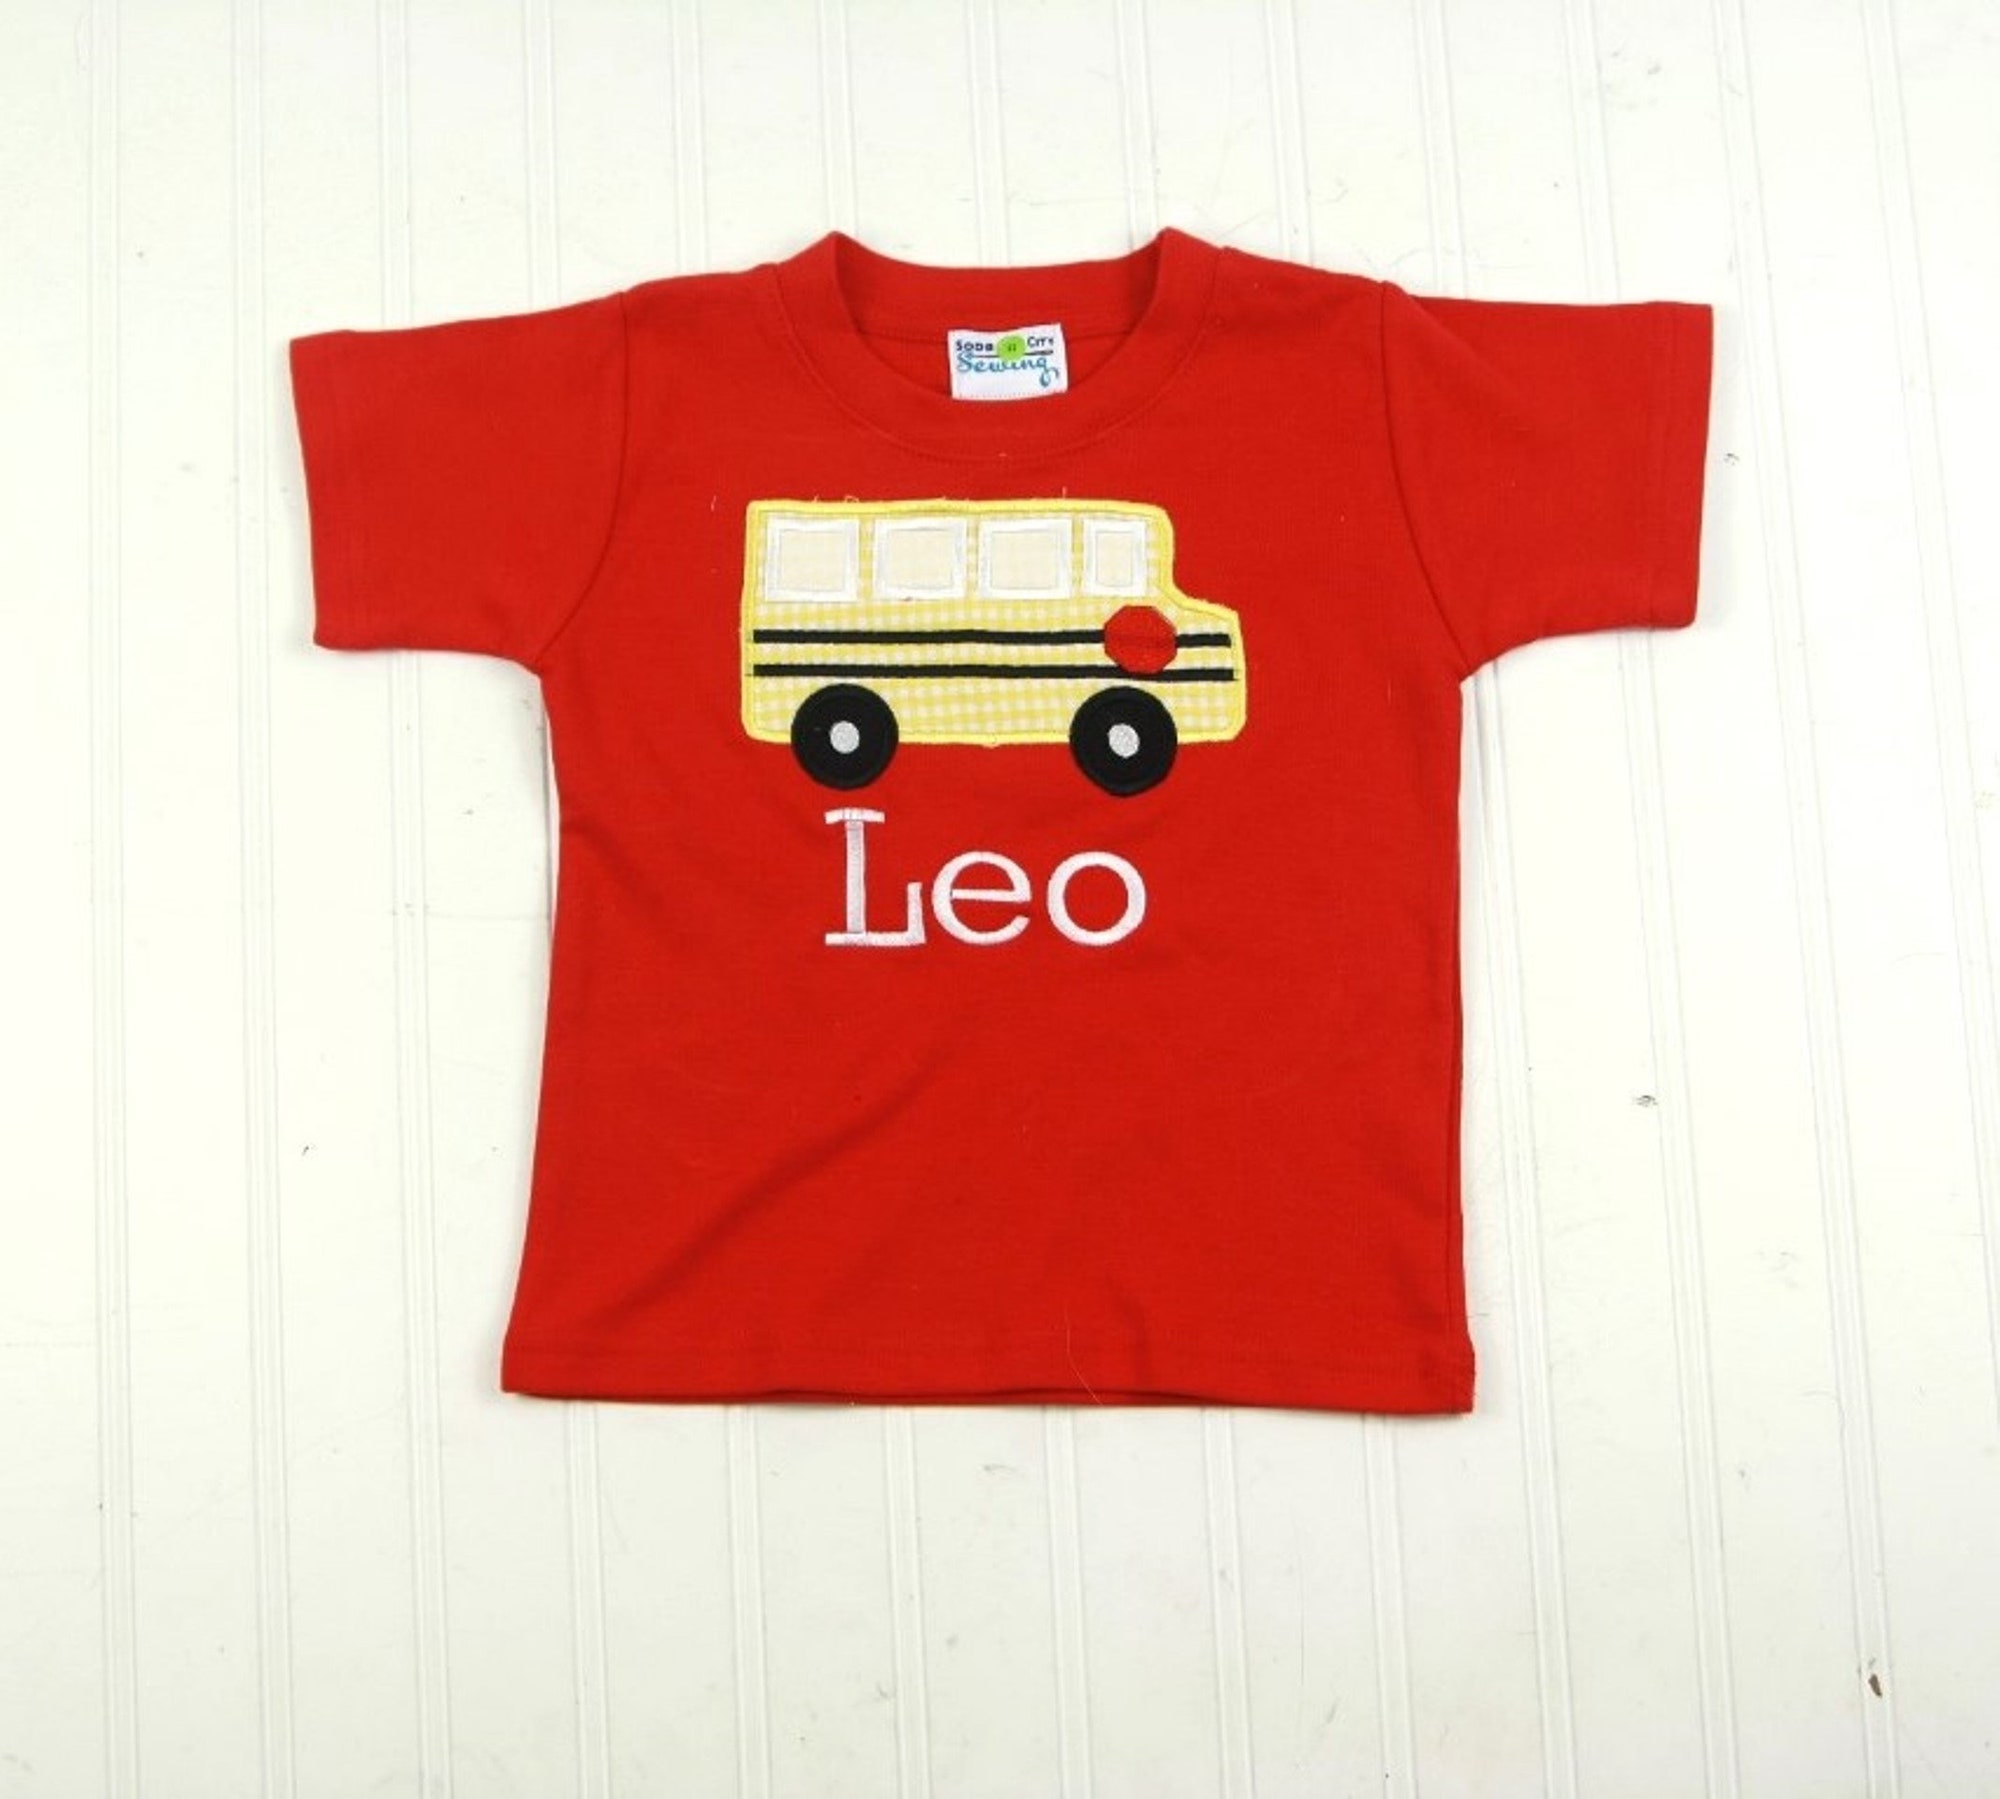 1st Day of School Shirt - Red School Bus Shirt Back to School Outfit